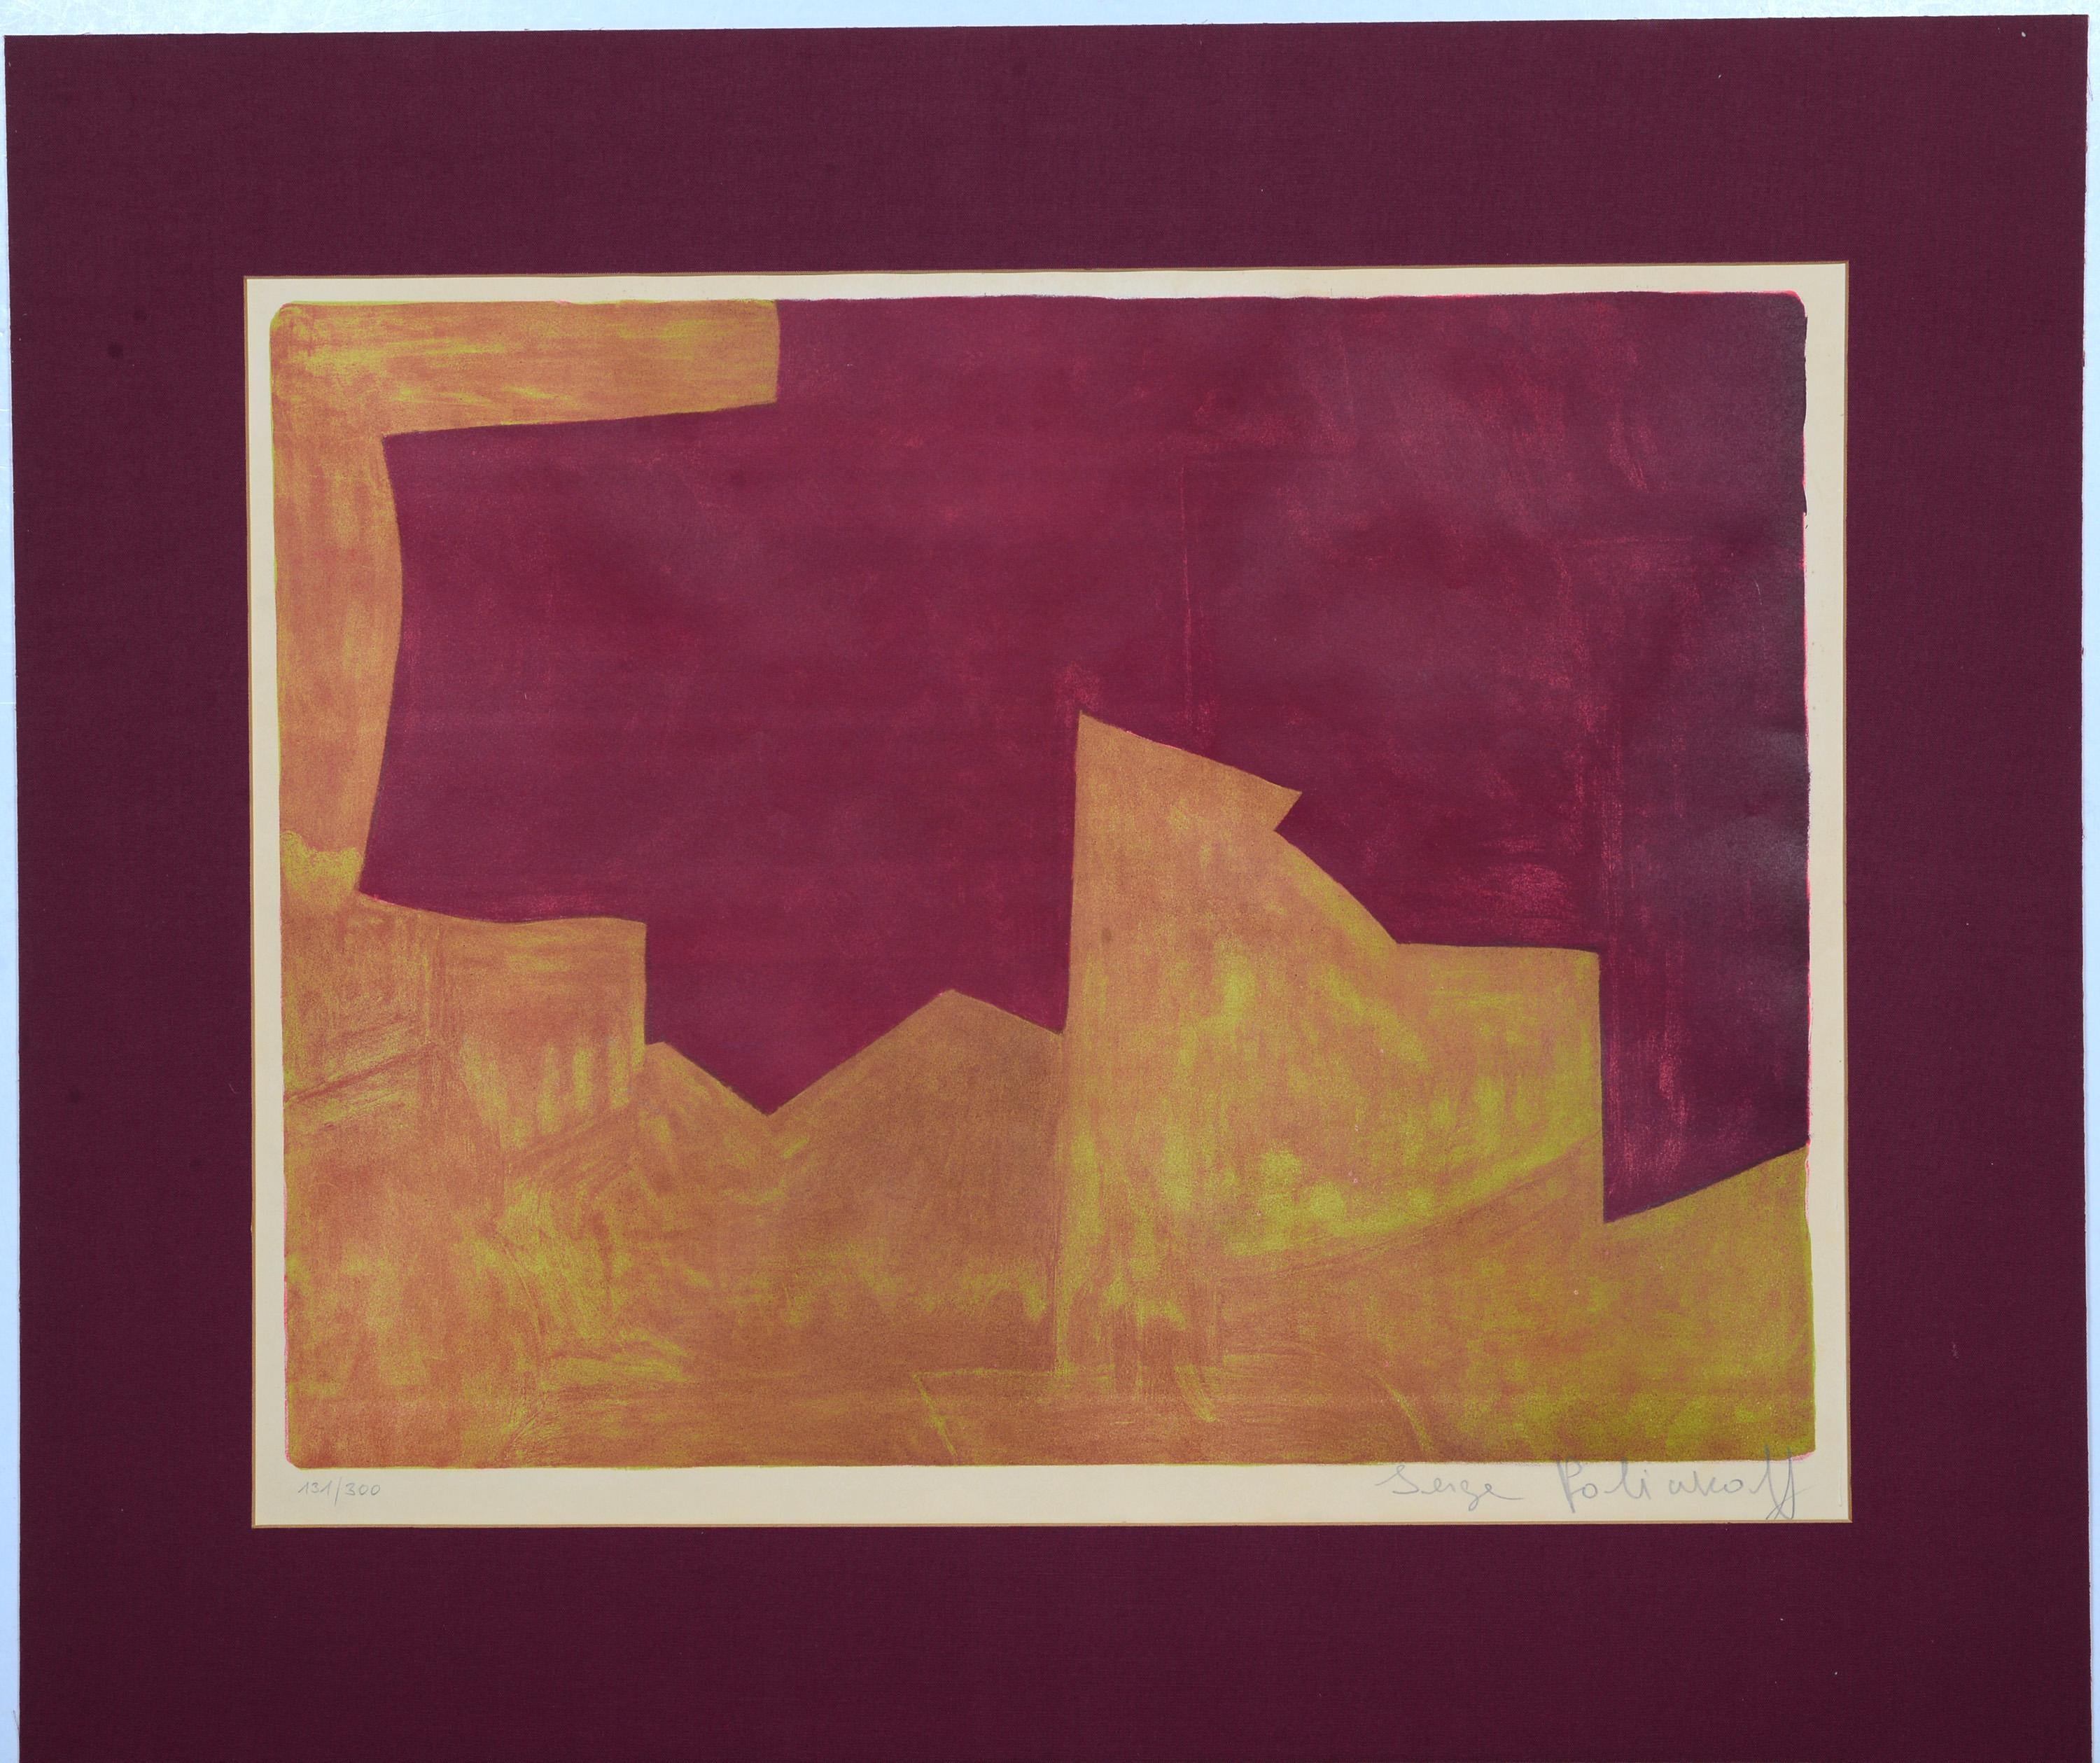 Orange And Bordeaux Composition  - Original Lithograph by Serge Poliakoff - 1963